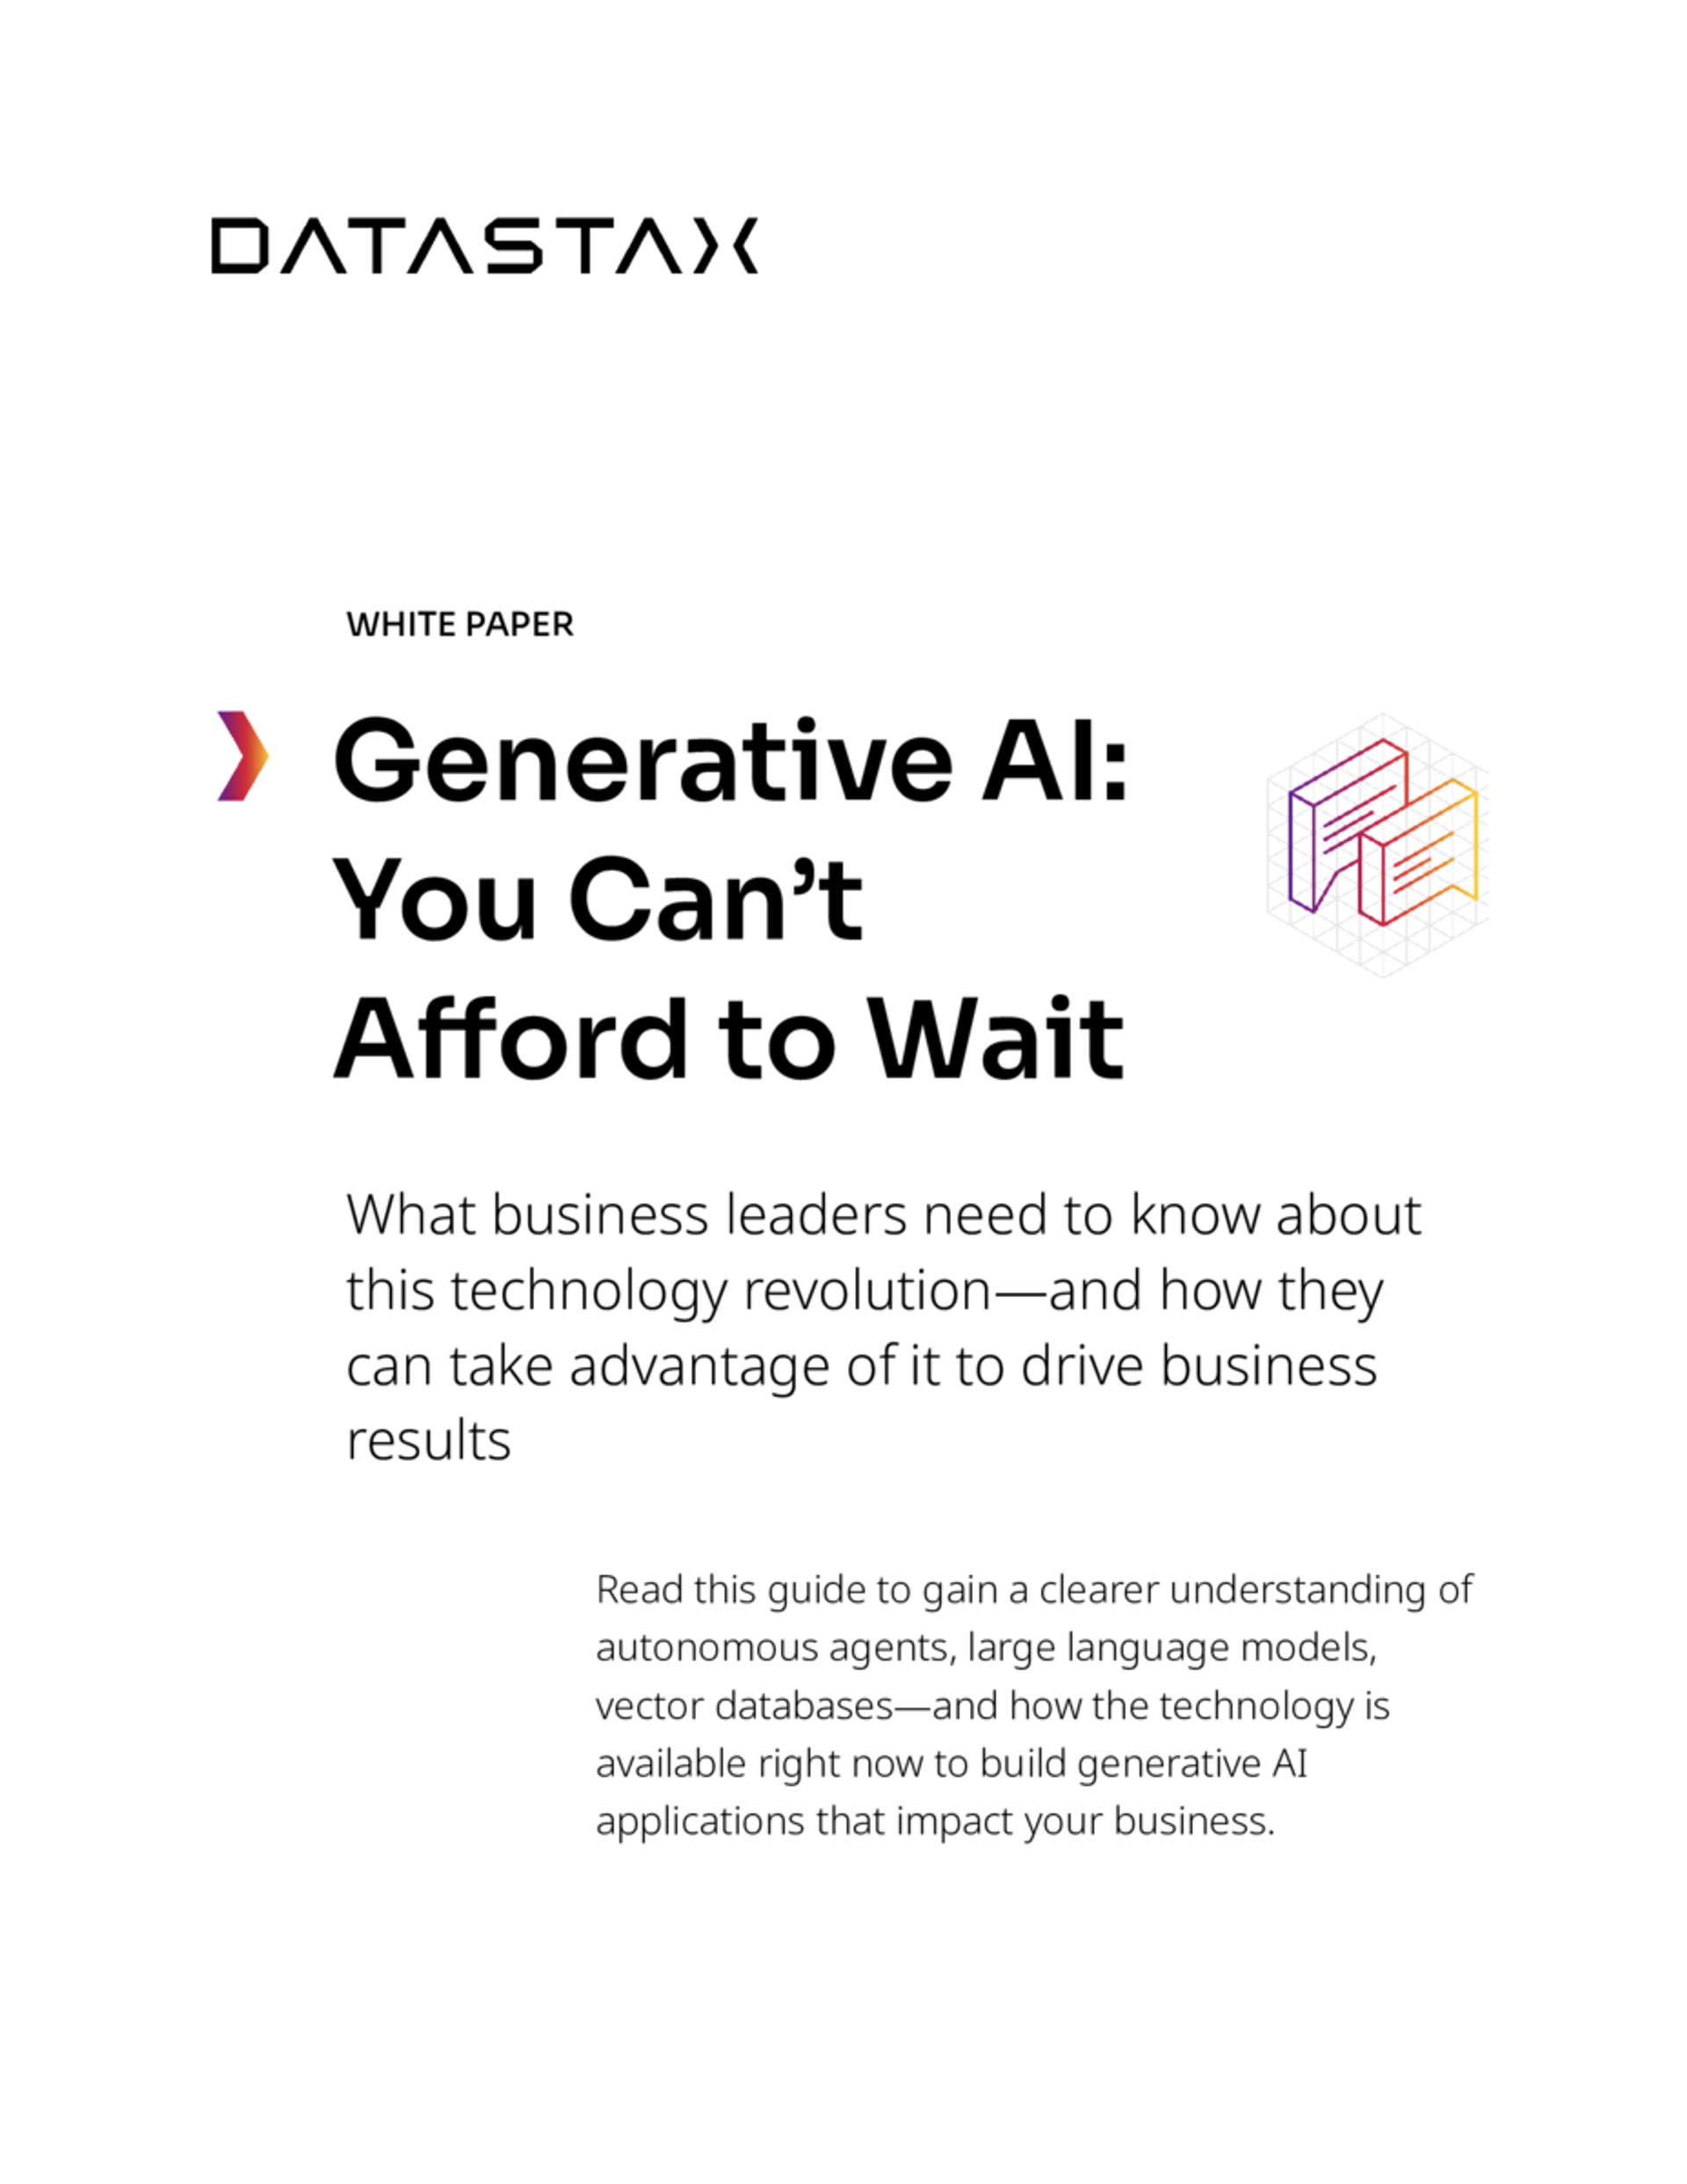 Generative AI: You Can’t Afford to Wait